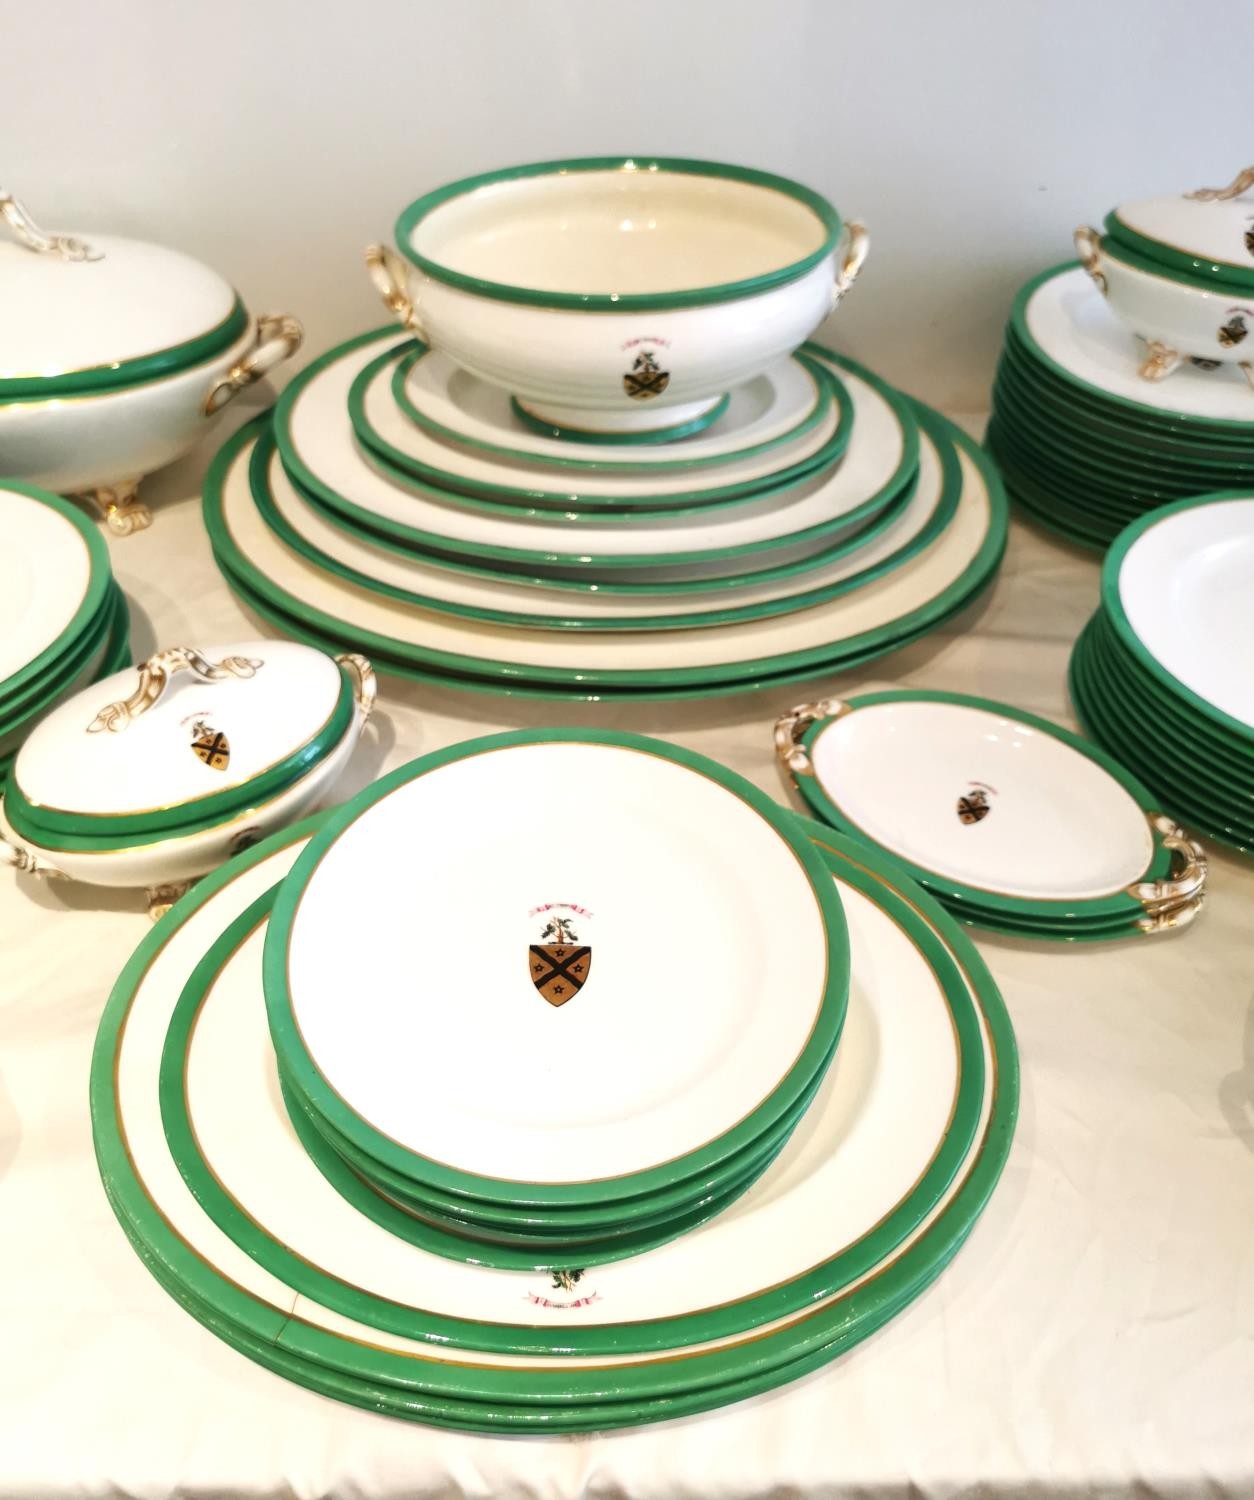 A 19th century hand painted large twelve person part dinner service with Christie coat of arms, - Image 3 of 10